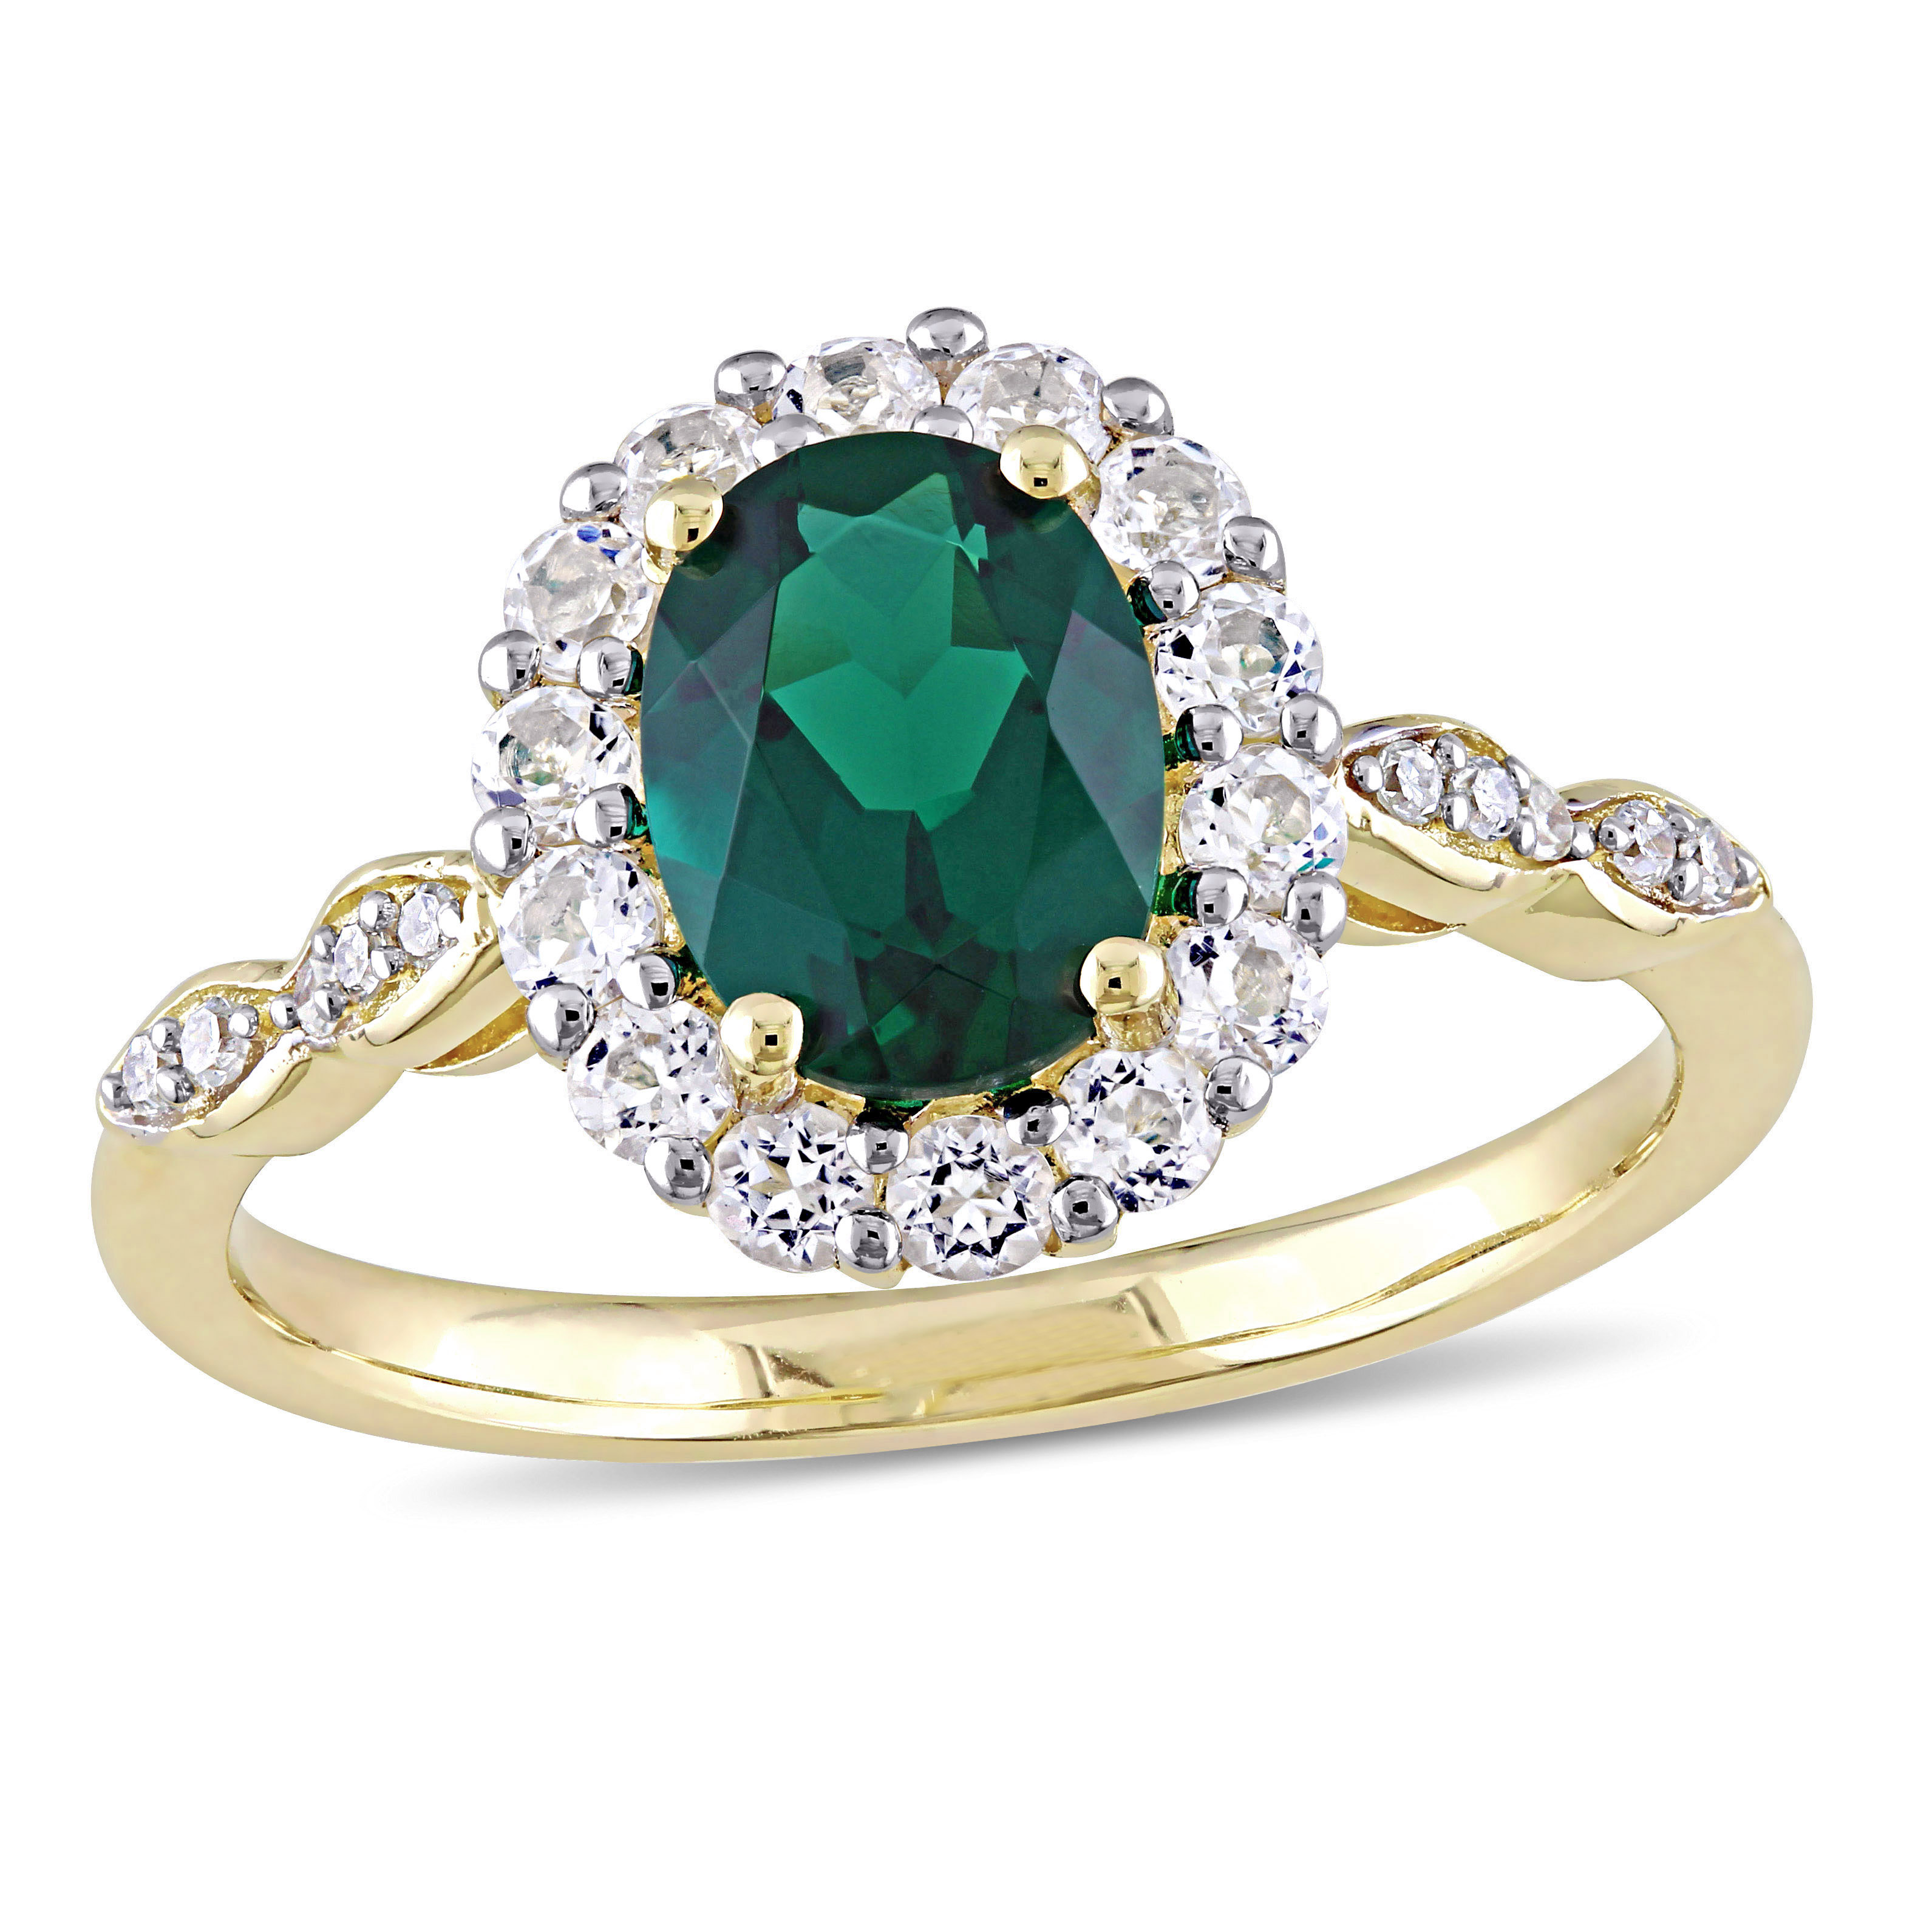 Oval Shape Created Emerald, White Topaz and Diamond Accent Vintage Ring in 14k Yellow Gold